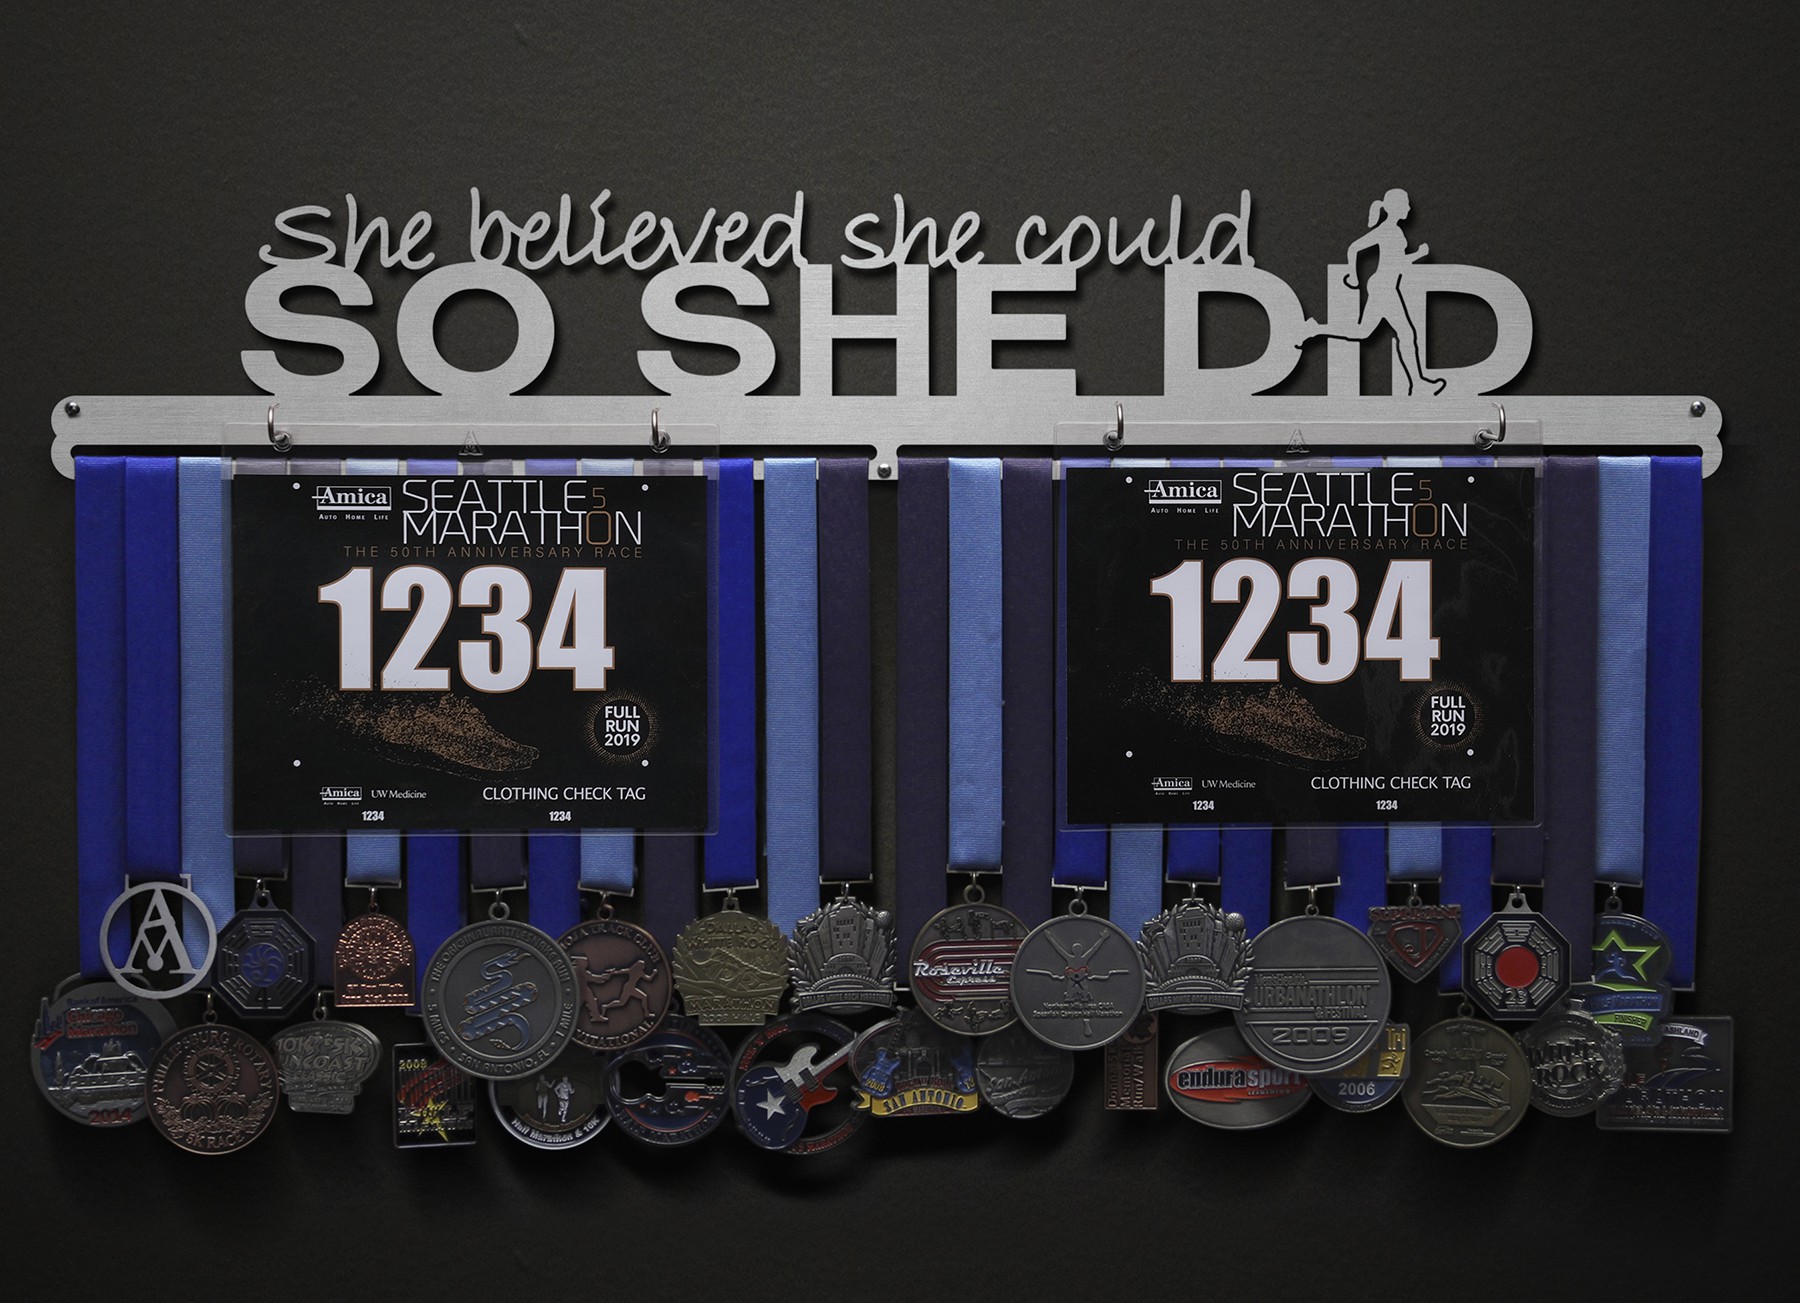 She Believed She Could, So She Did Bib and Medal Display - with runner figure